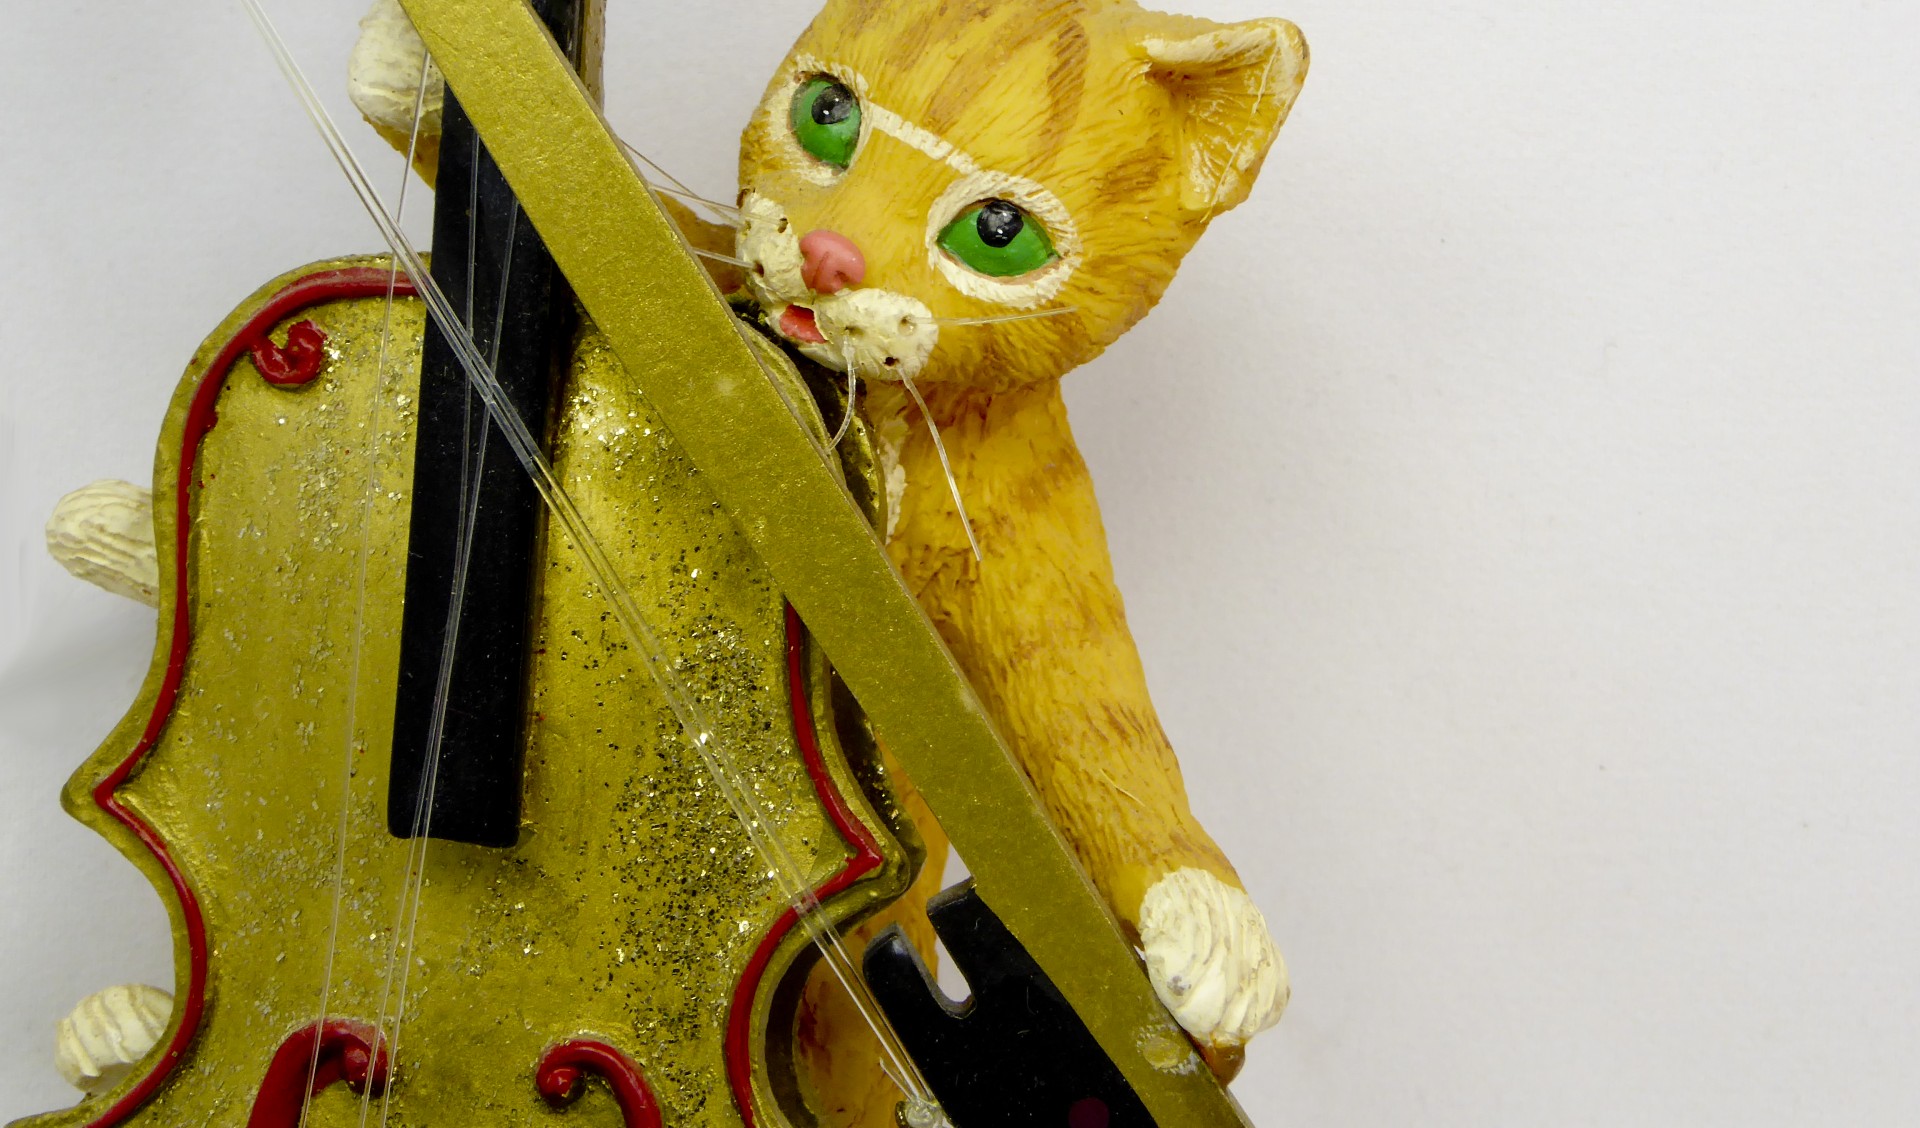 Cat Playing Cello